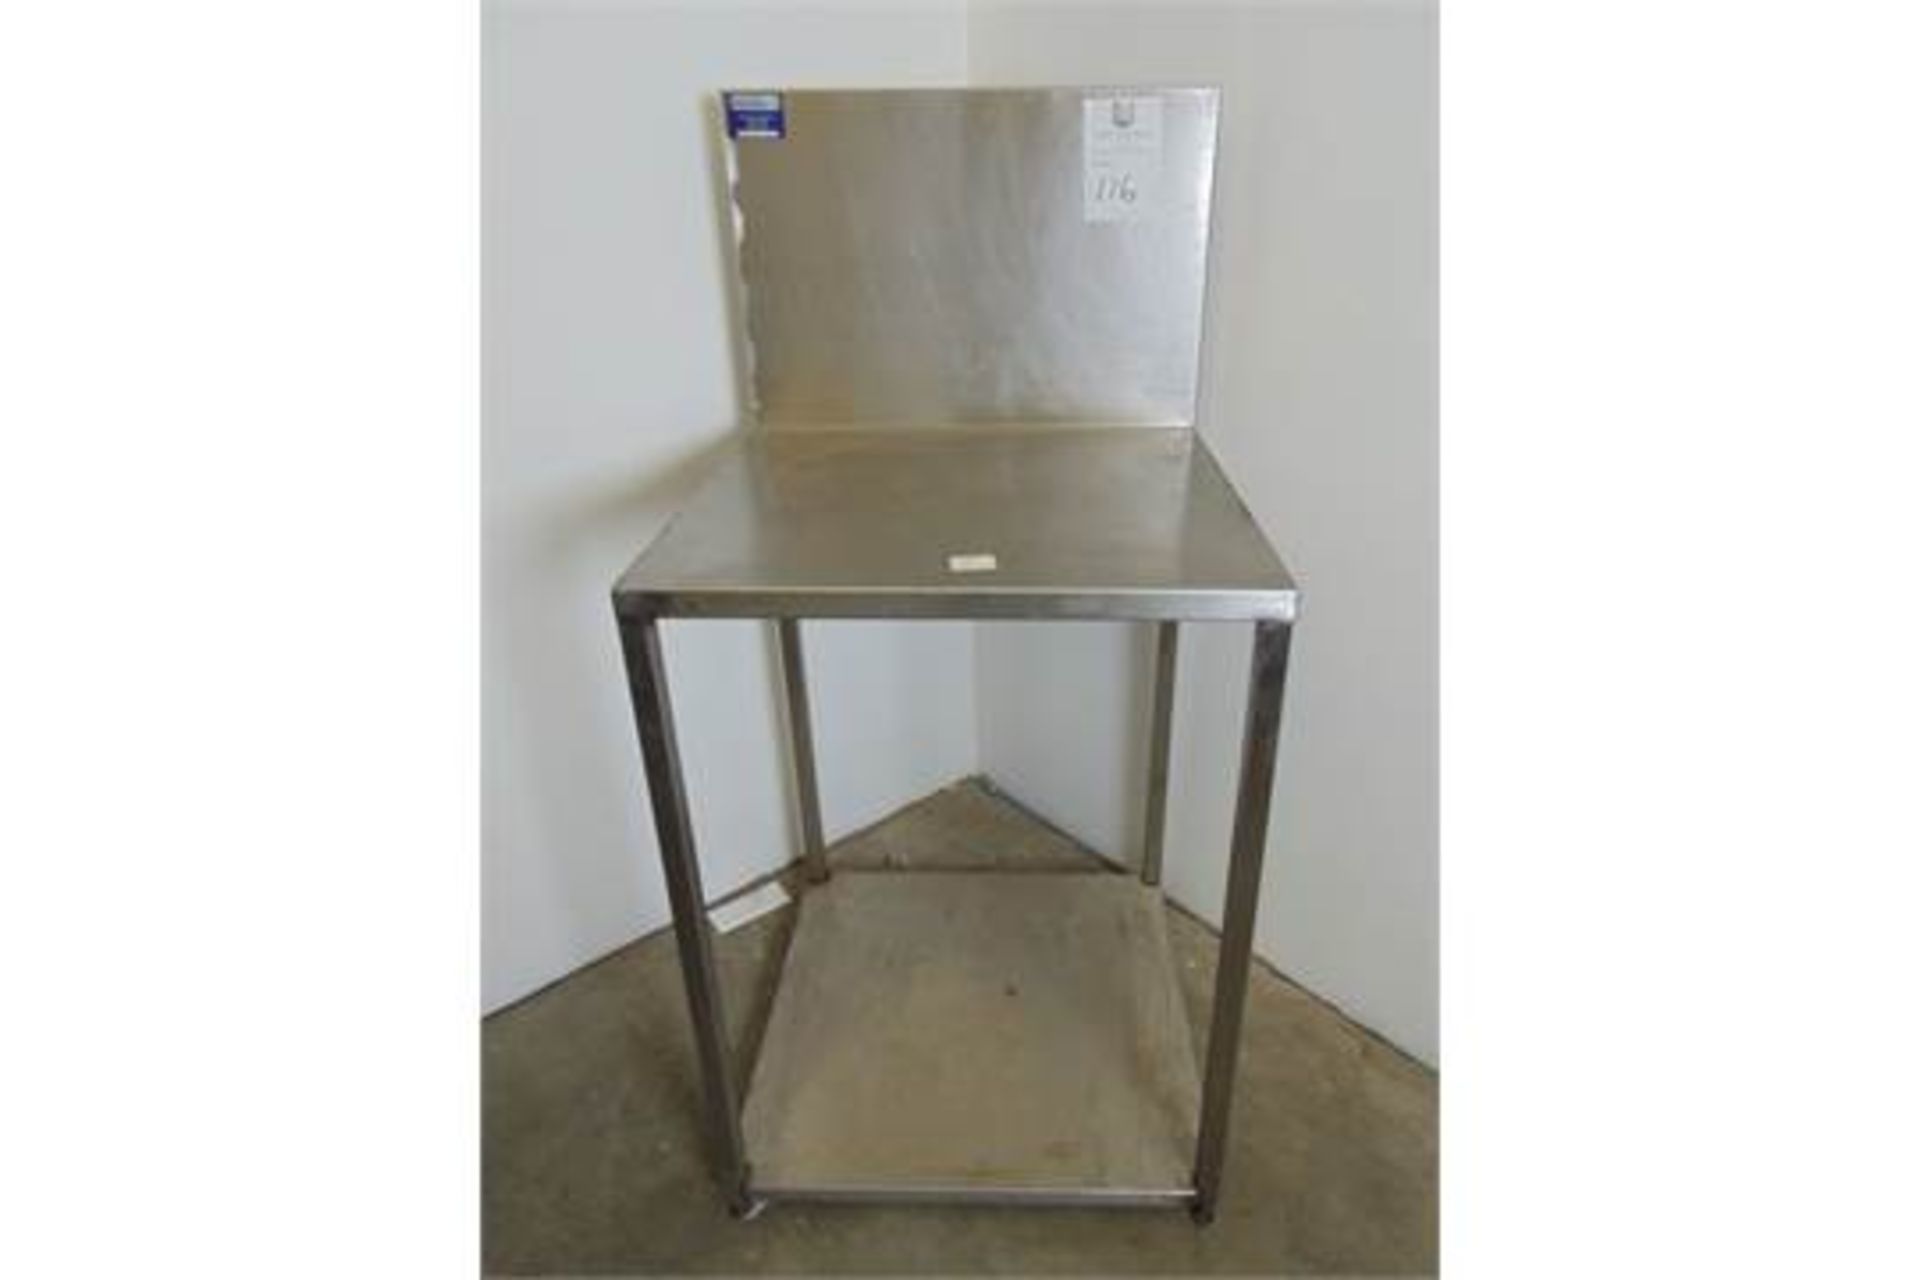 Stainless Steel Table with High Splashback